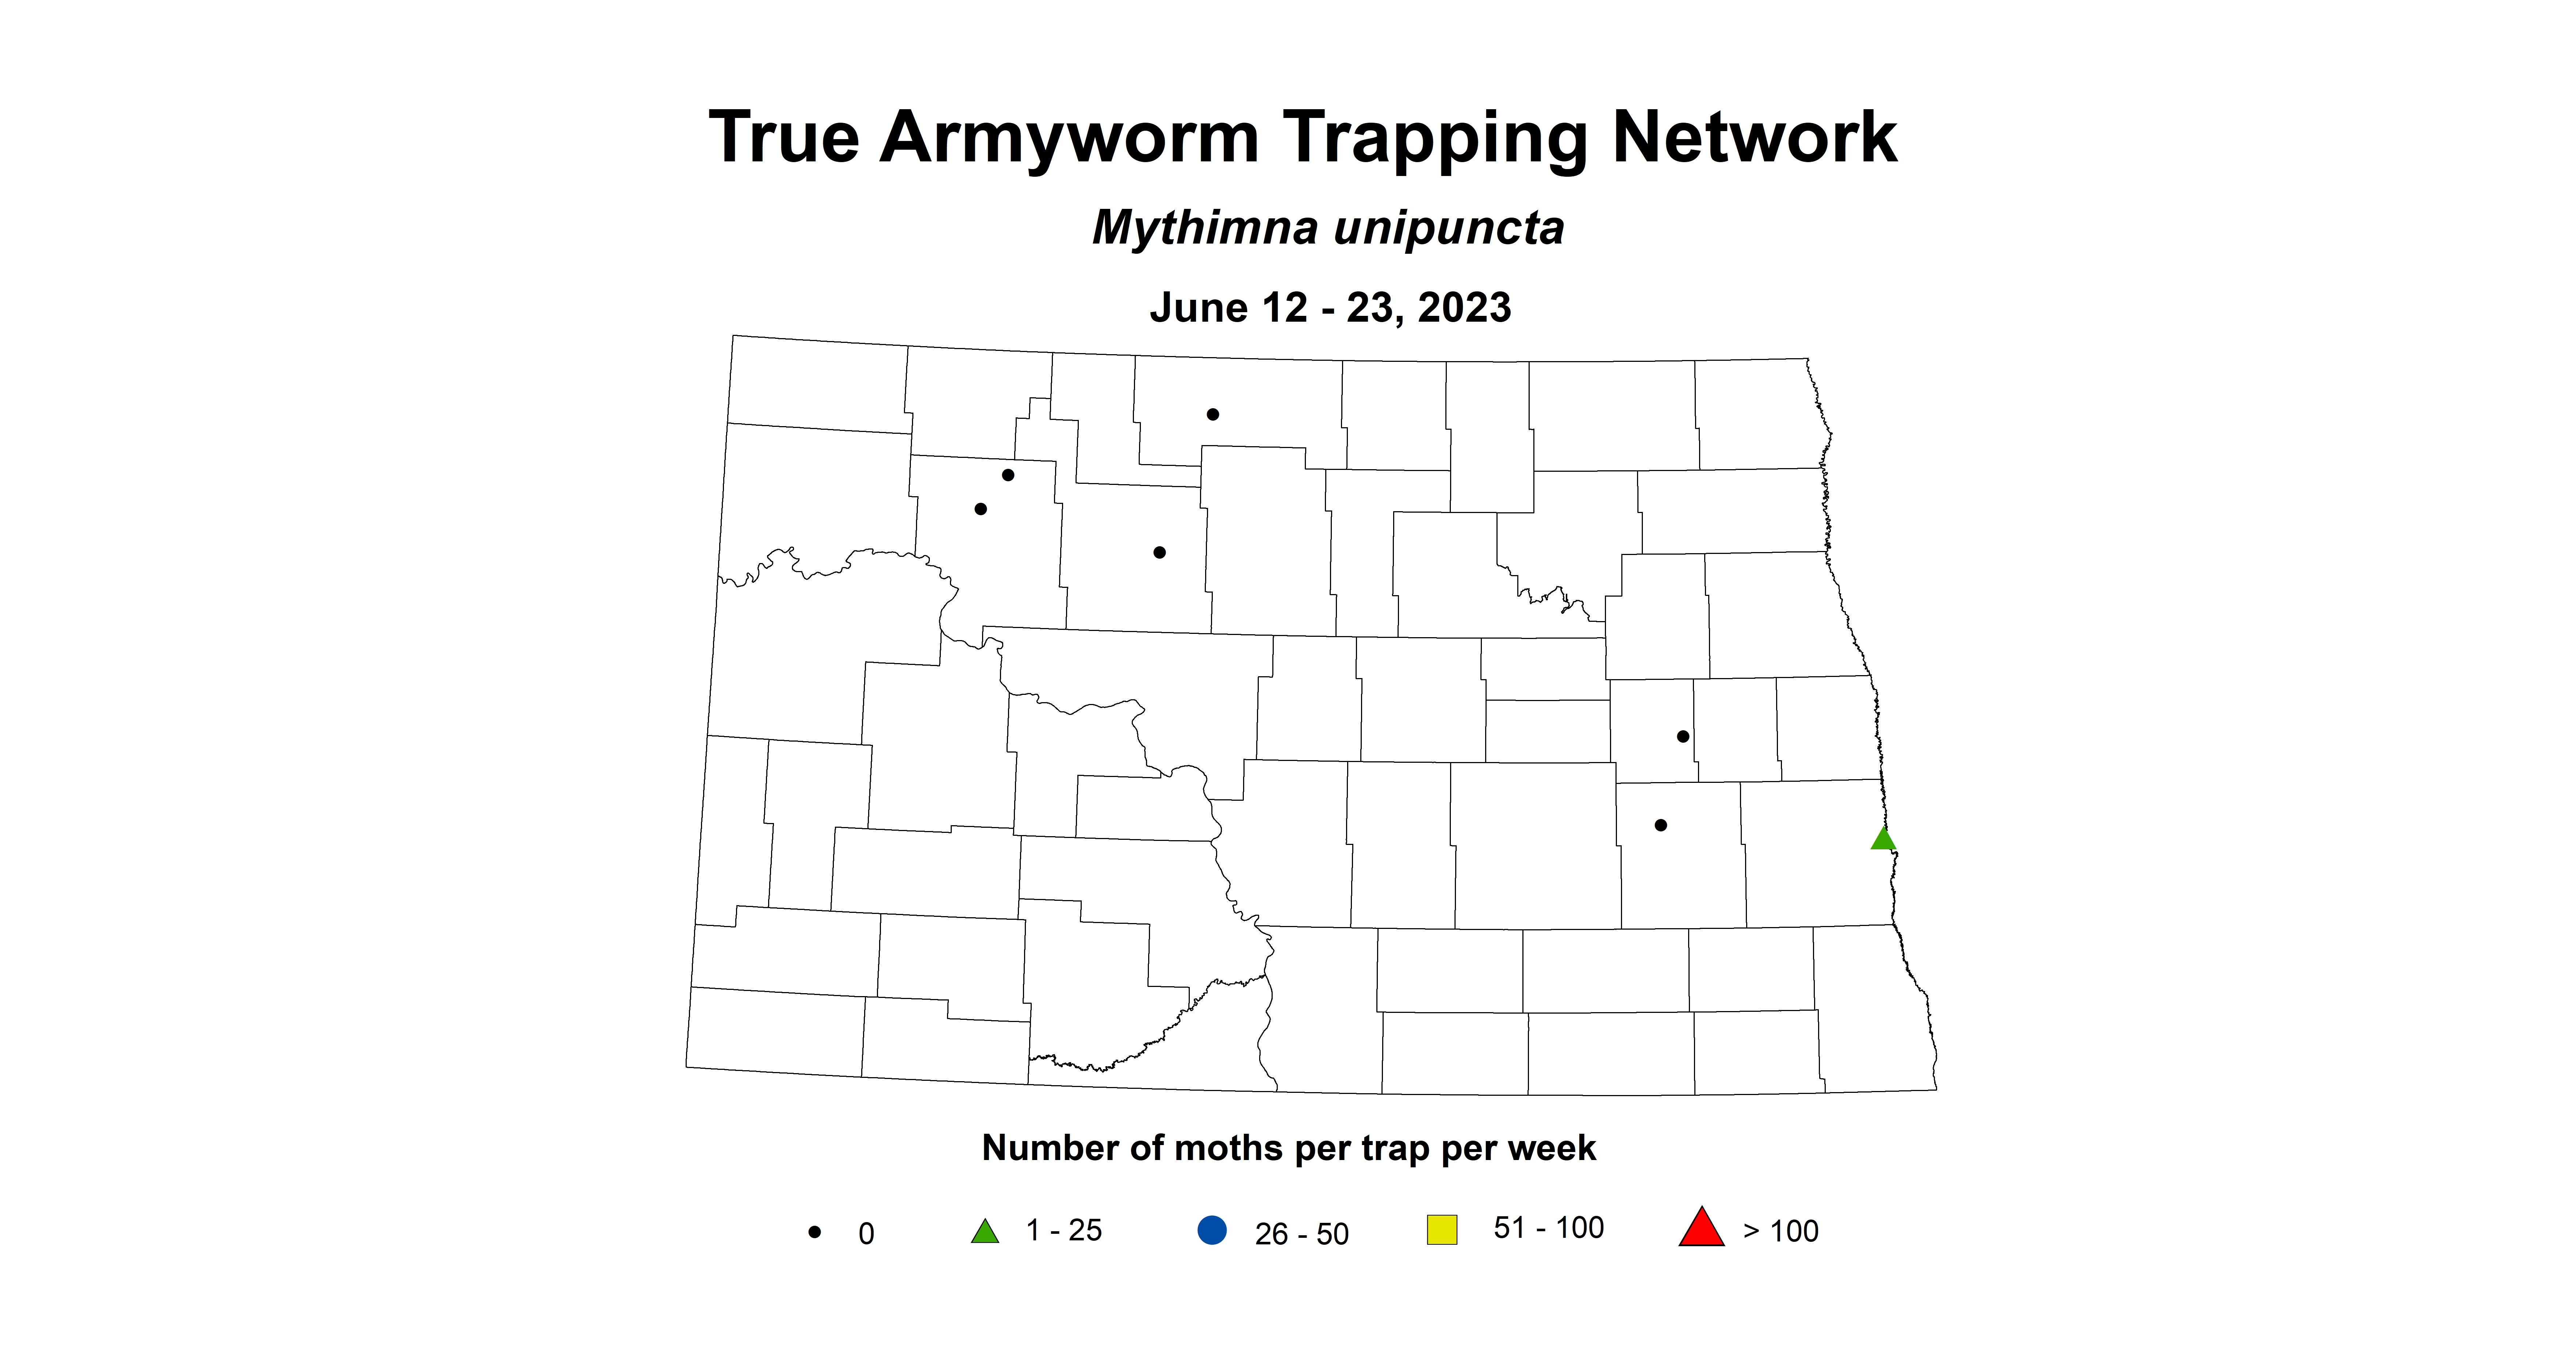 wheat insect trap true armyworm June 12-23 2023